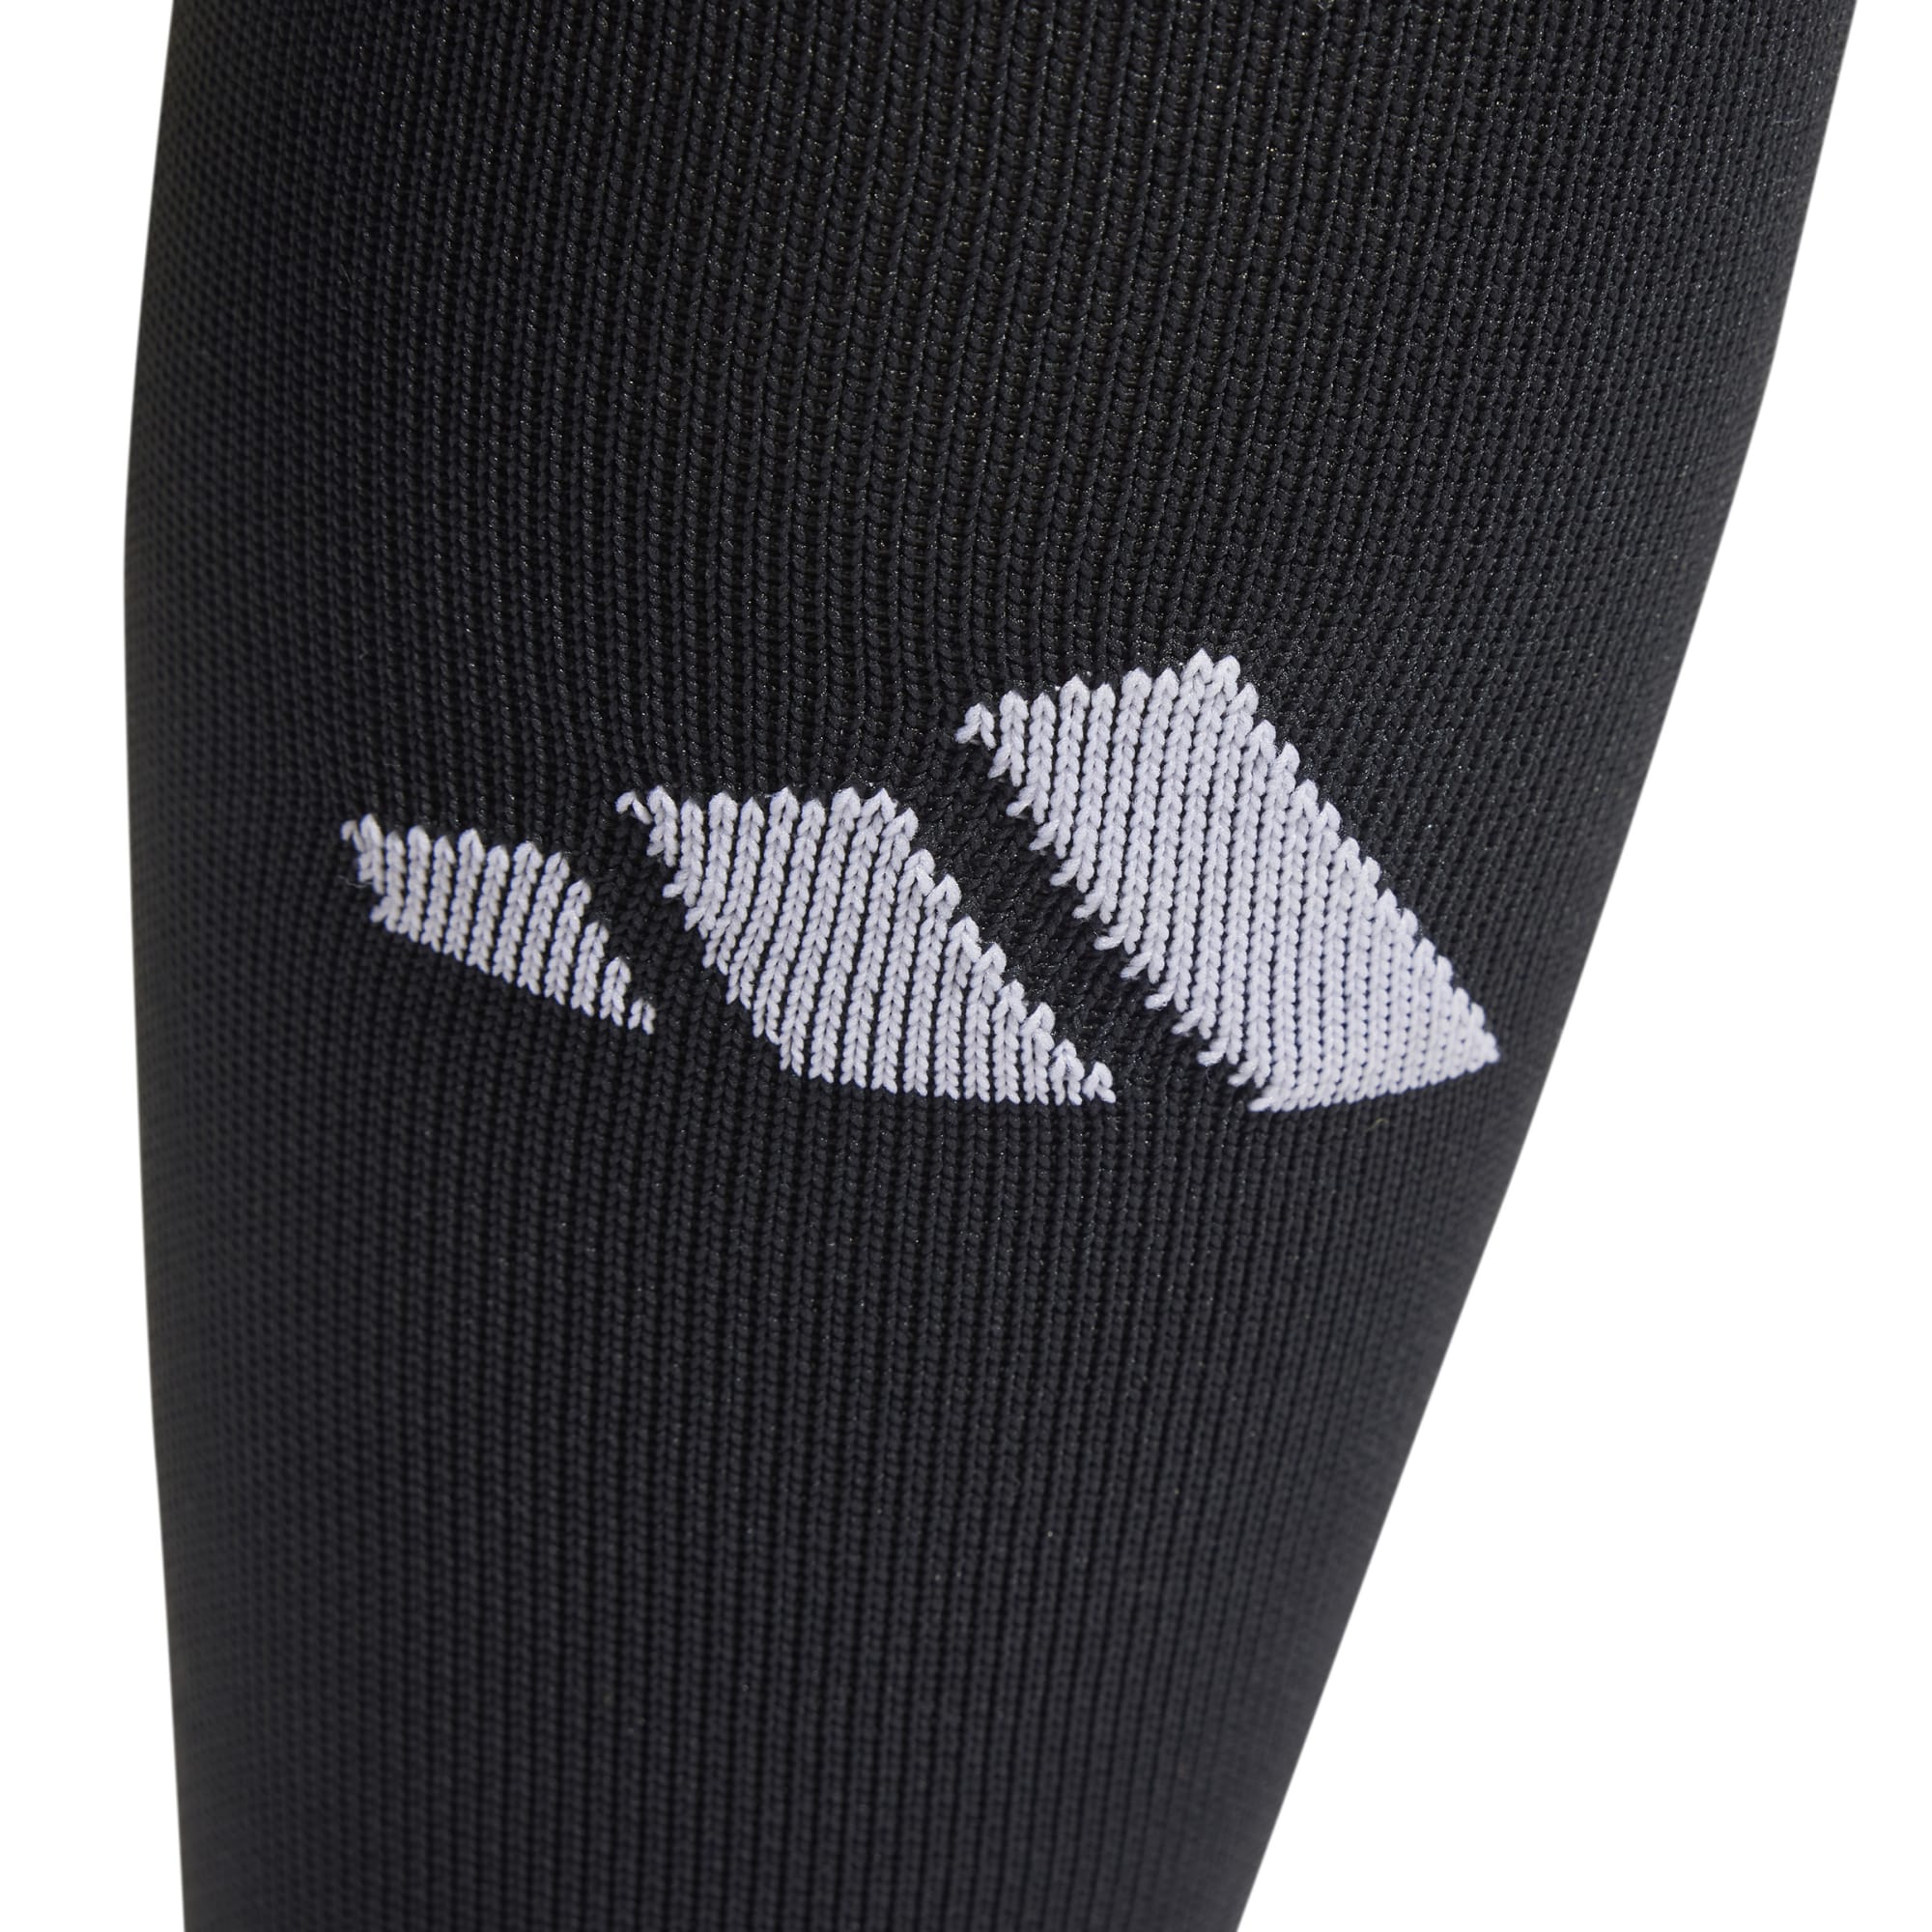 adidas Cushioned 2.0 Socks (For Men and Women) - Save 27%